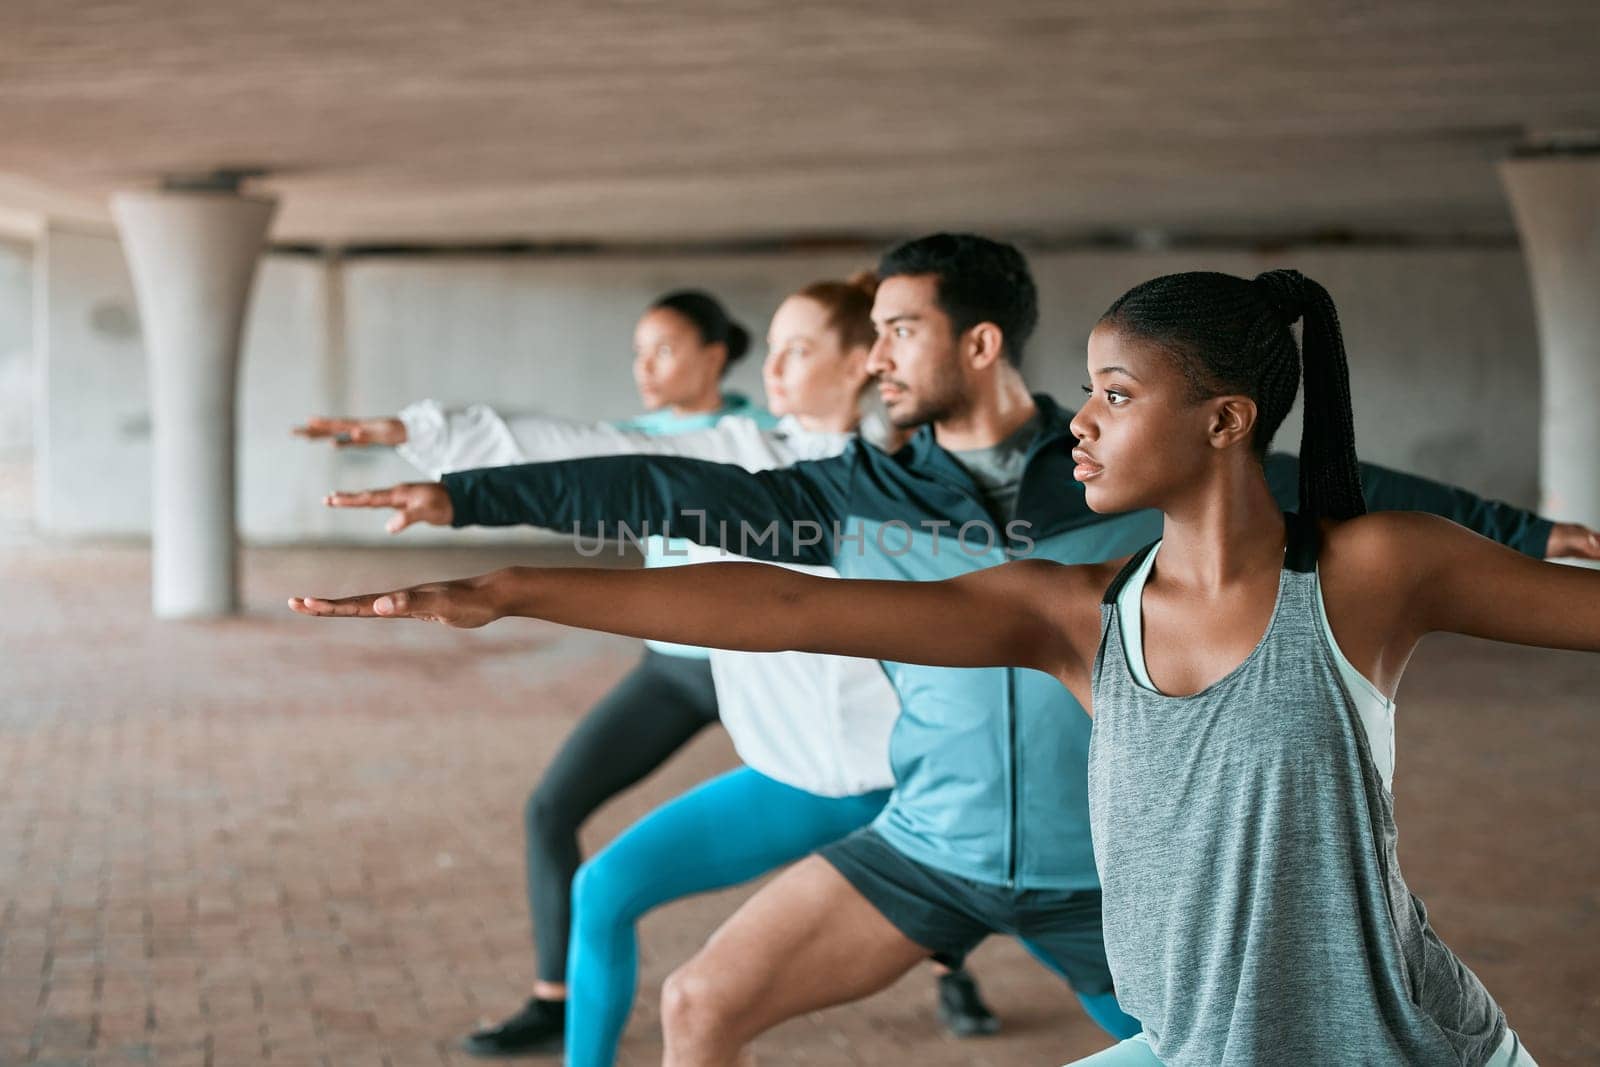 Team, exercise and friends stretching as a fitness club for sports, health and wellness in an urban class together. Sport, commitment and people training or group doing pilates workout in yoga by YuriArcurs